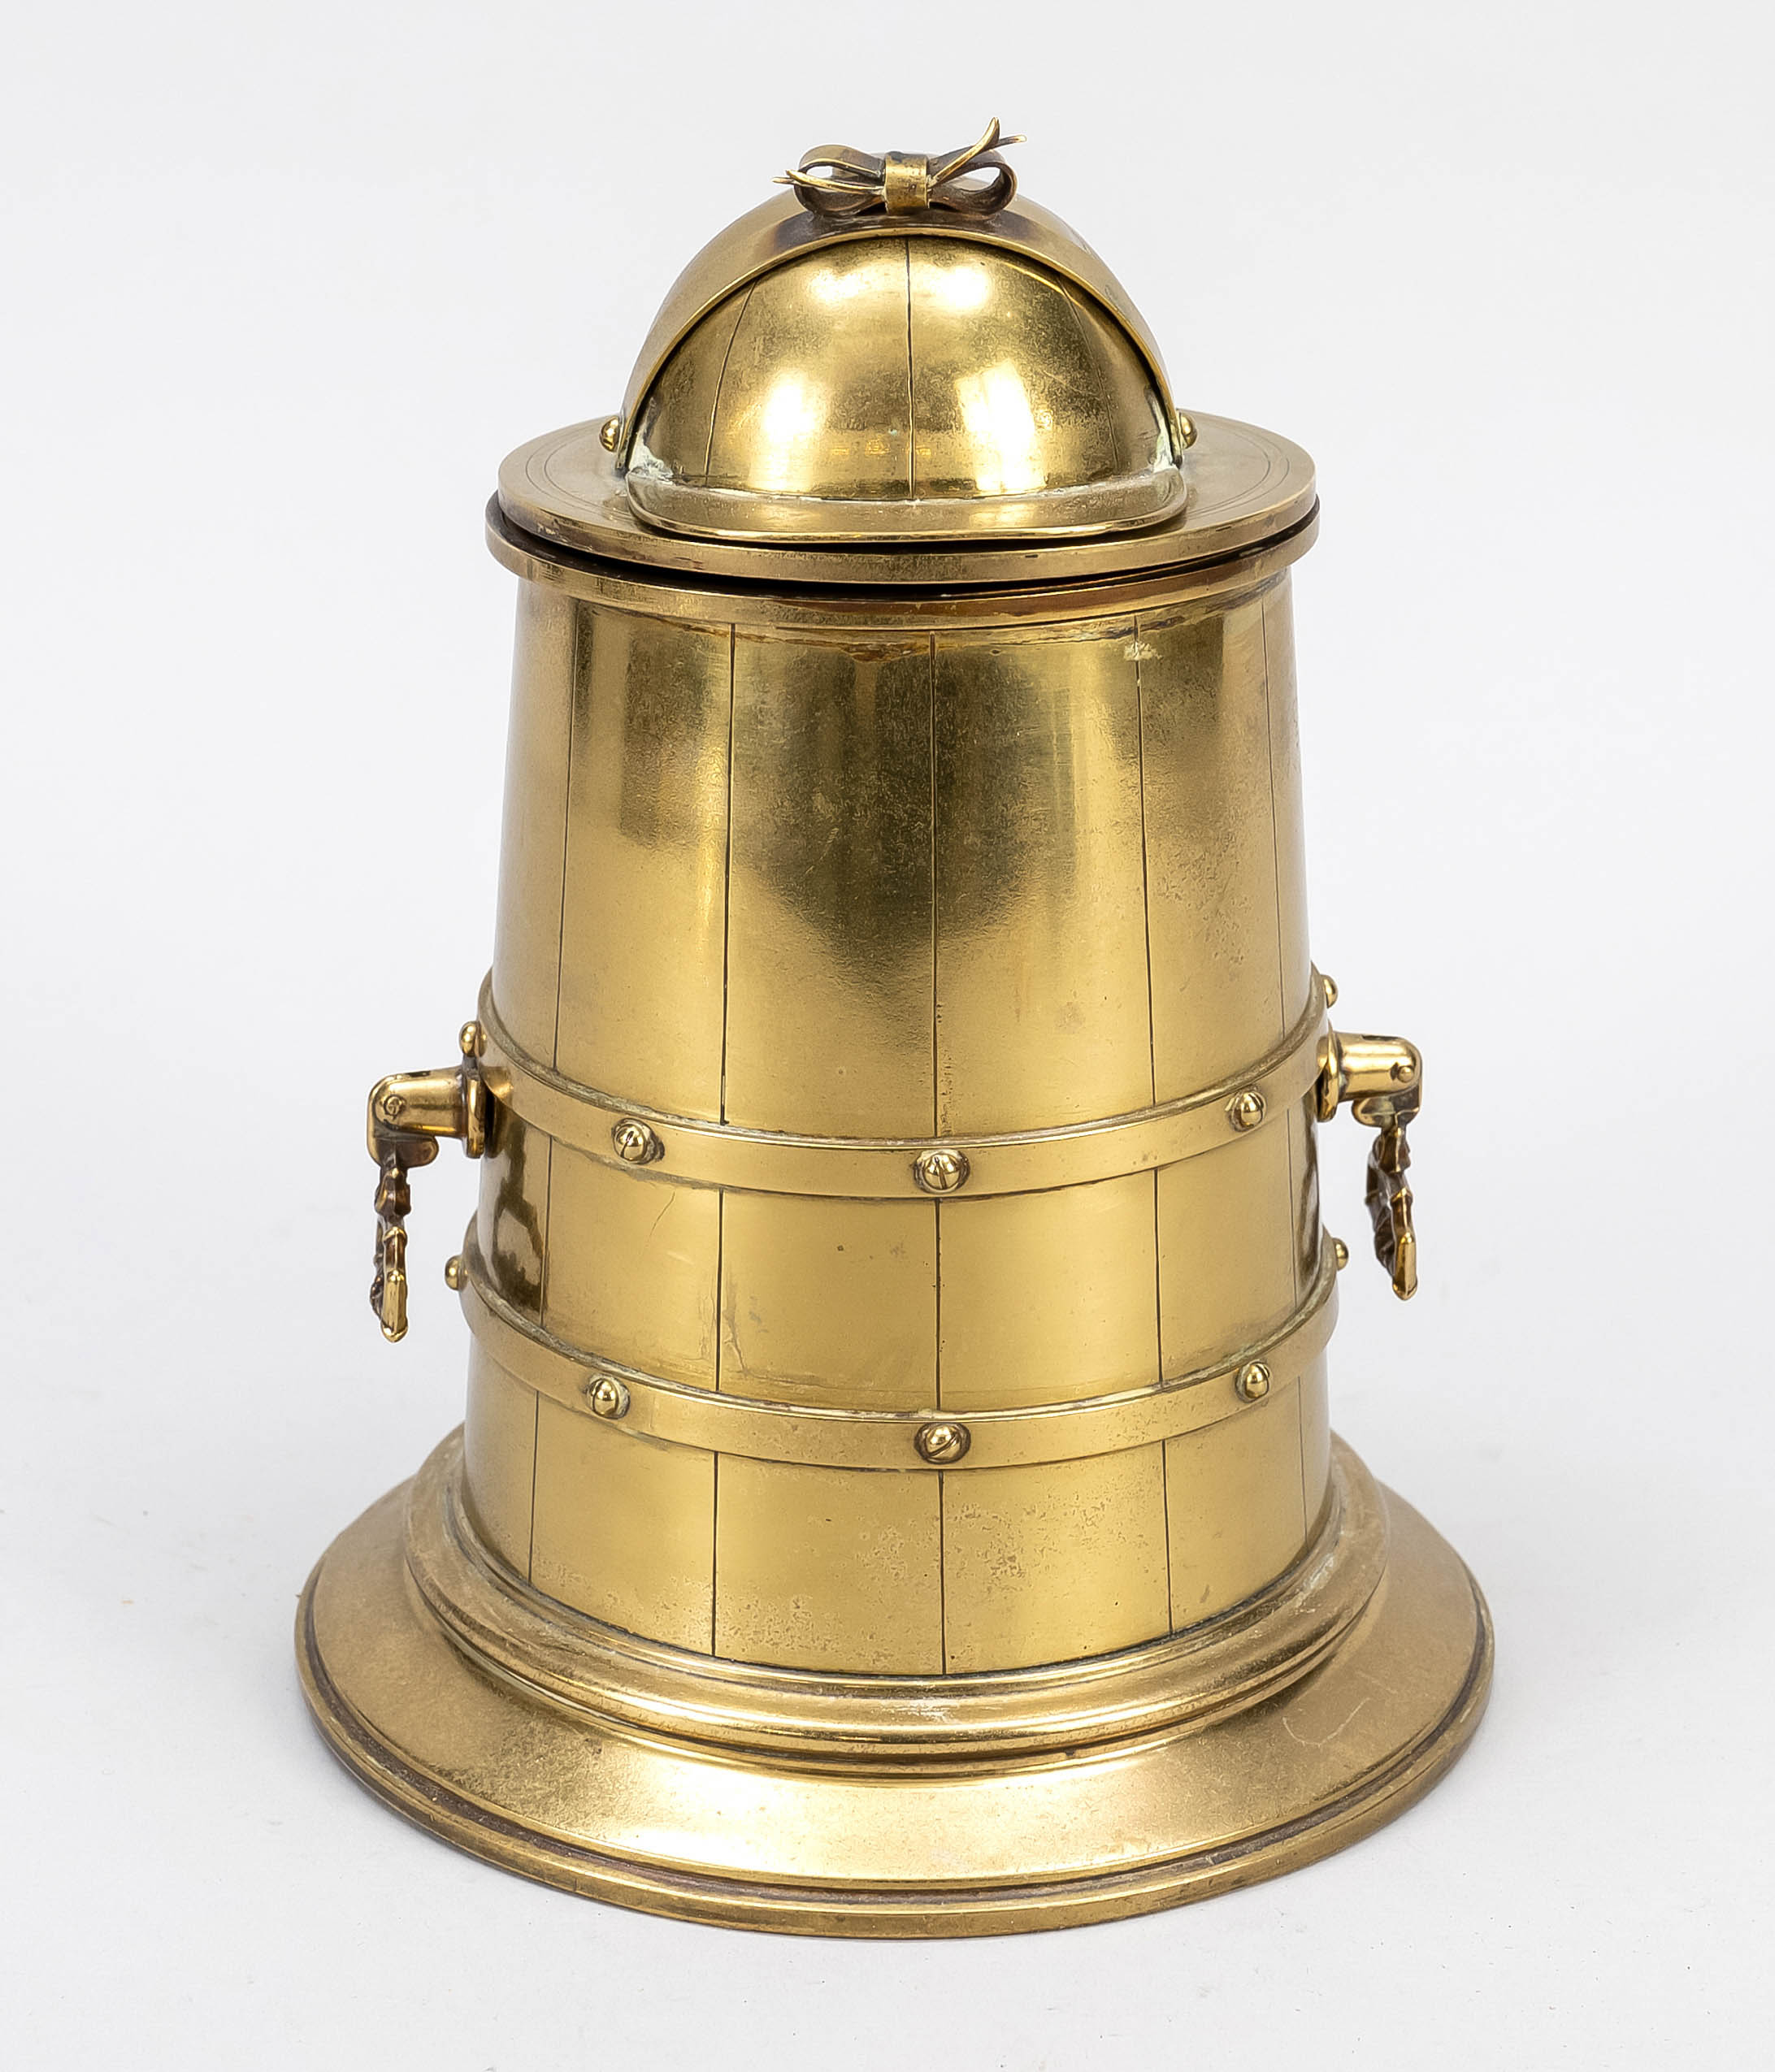 Jockey's tobacco pot, late 19th/early 20th century, brass. Slightly conical barrel with 2 bands,